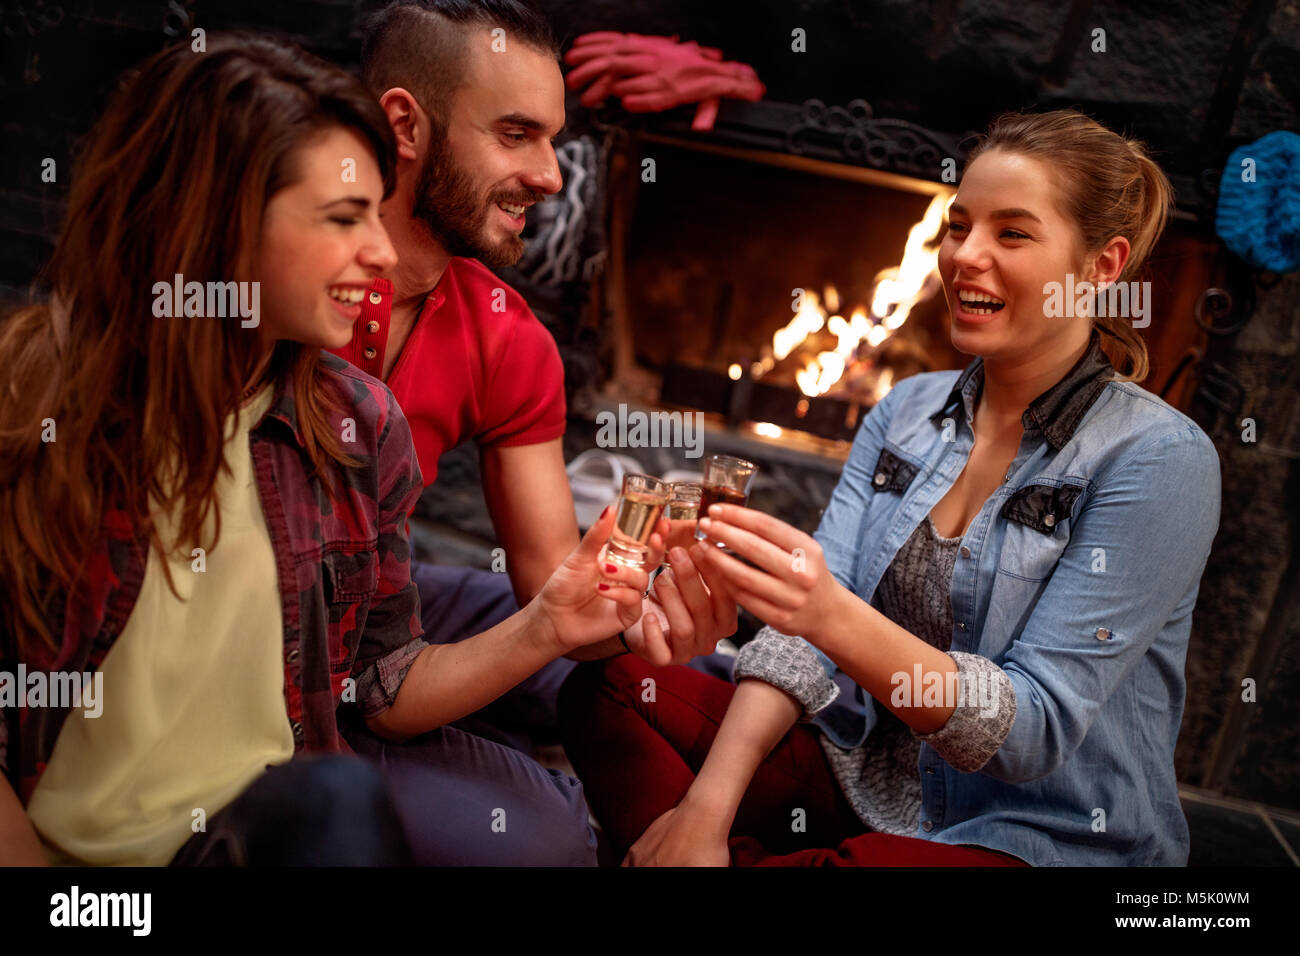 Time of relaxing after skiing-Smiling friends cheering with drinks together Stock Photo